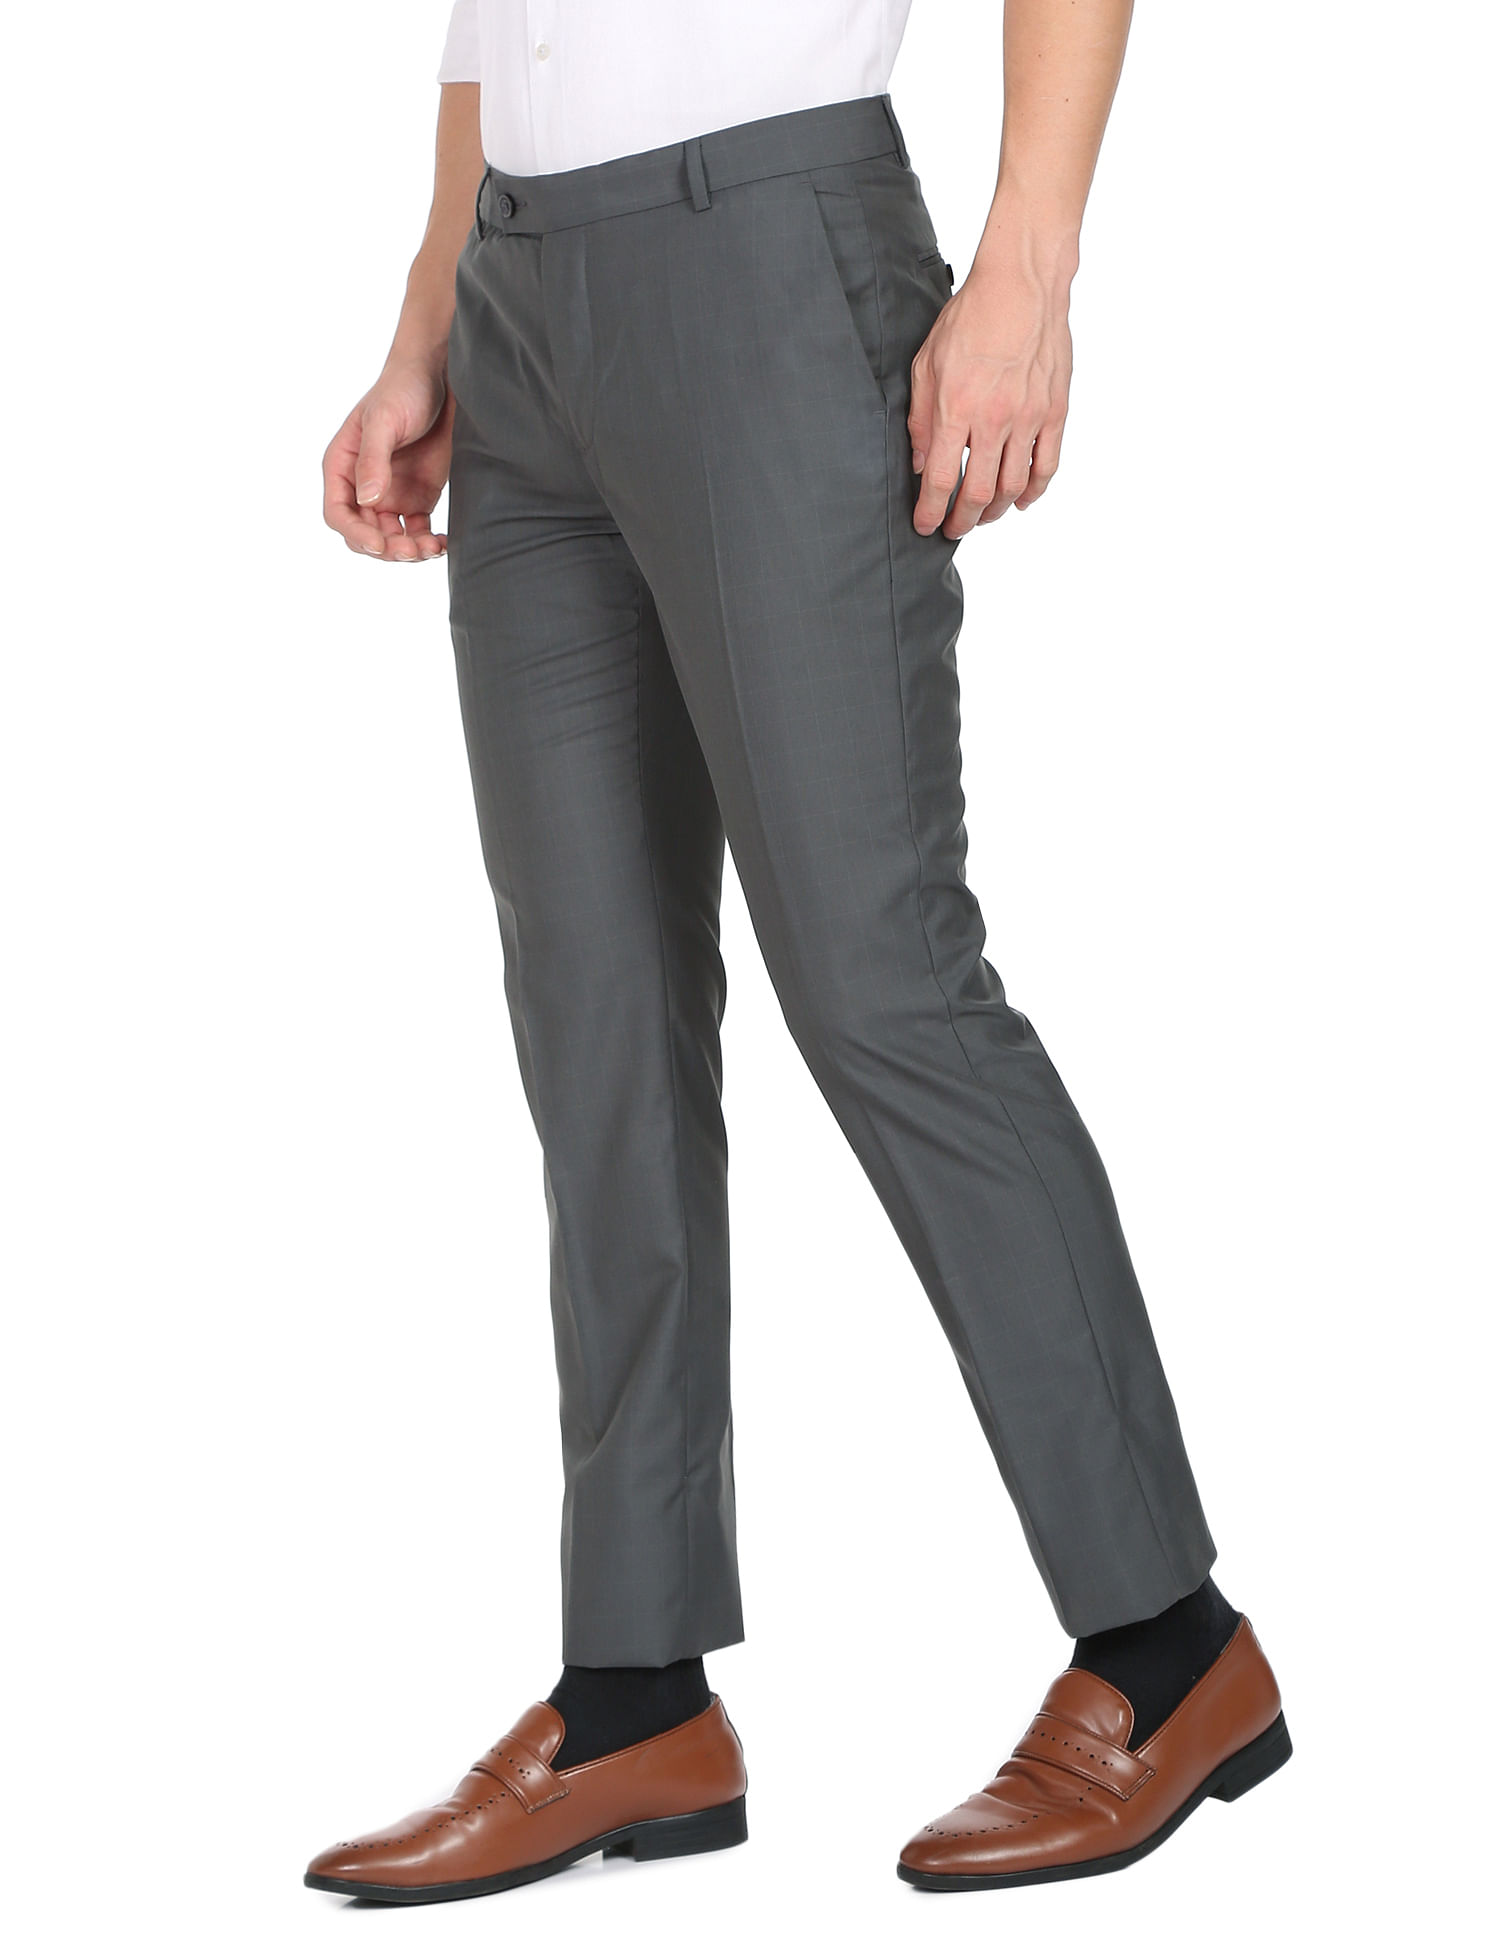 Formal Trousers for Men – Aristitch